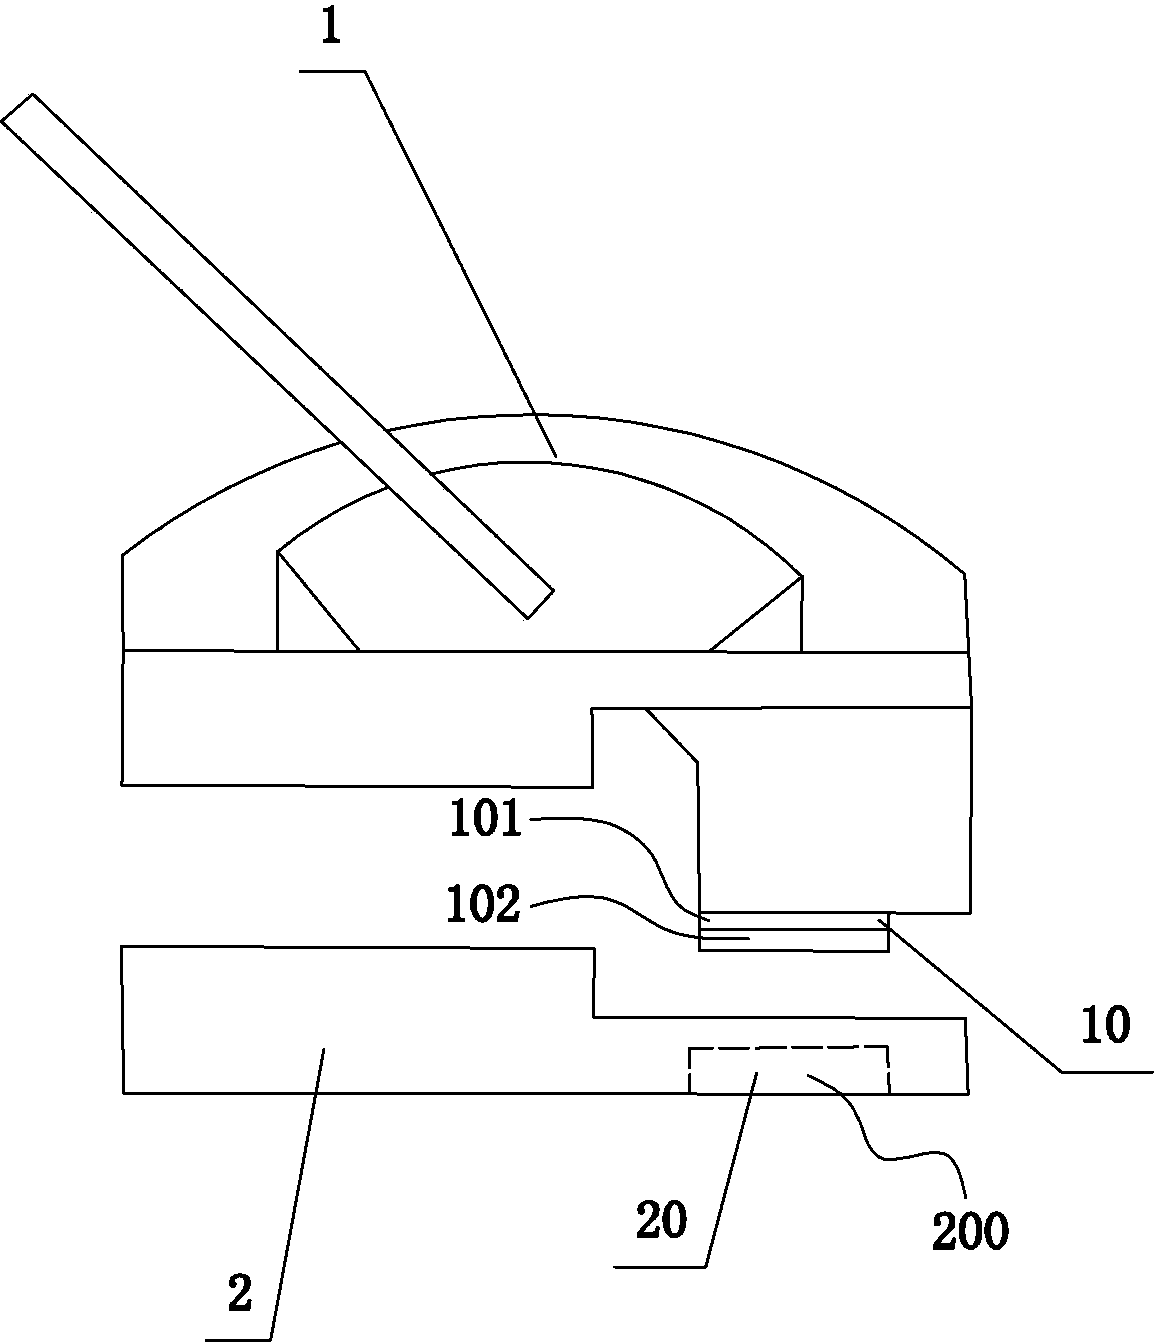 Puller structure convenient to demount and provided with nano-pores in surface for zipper